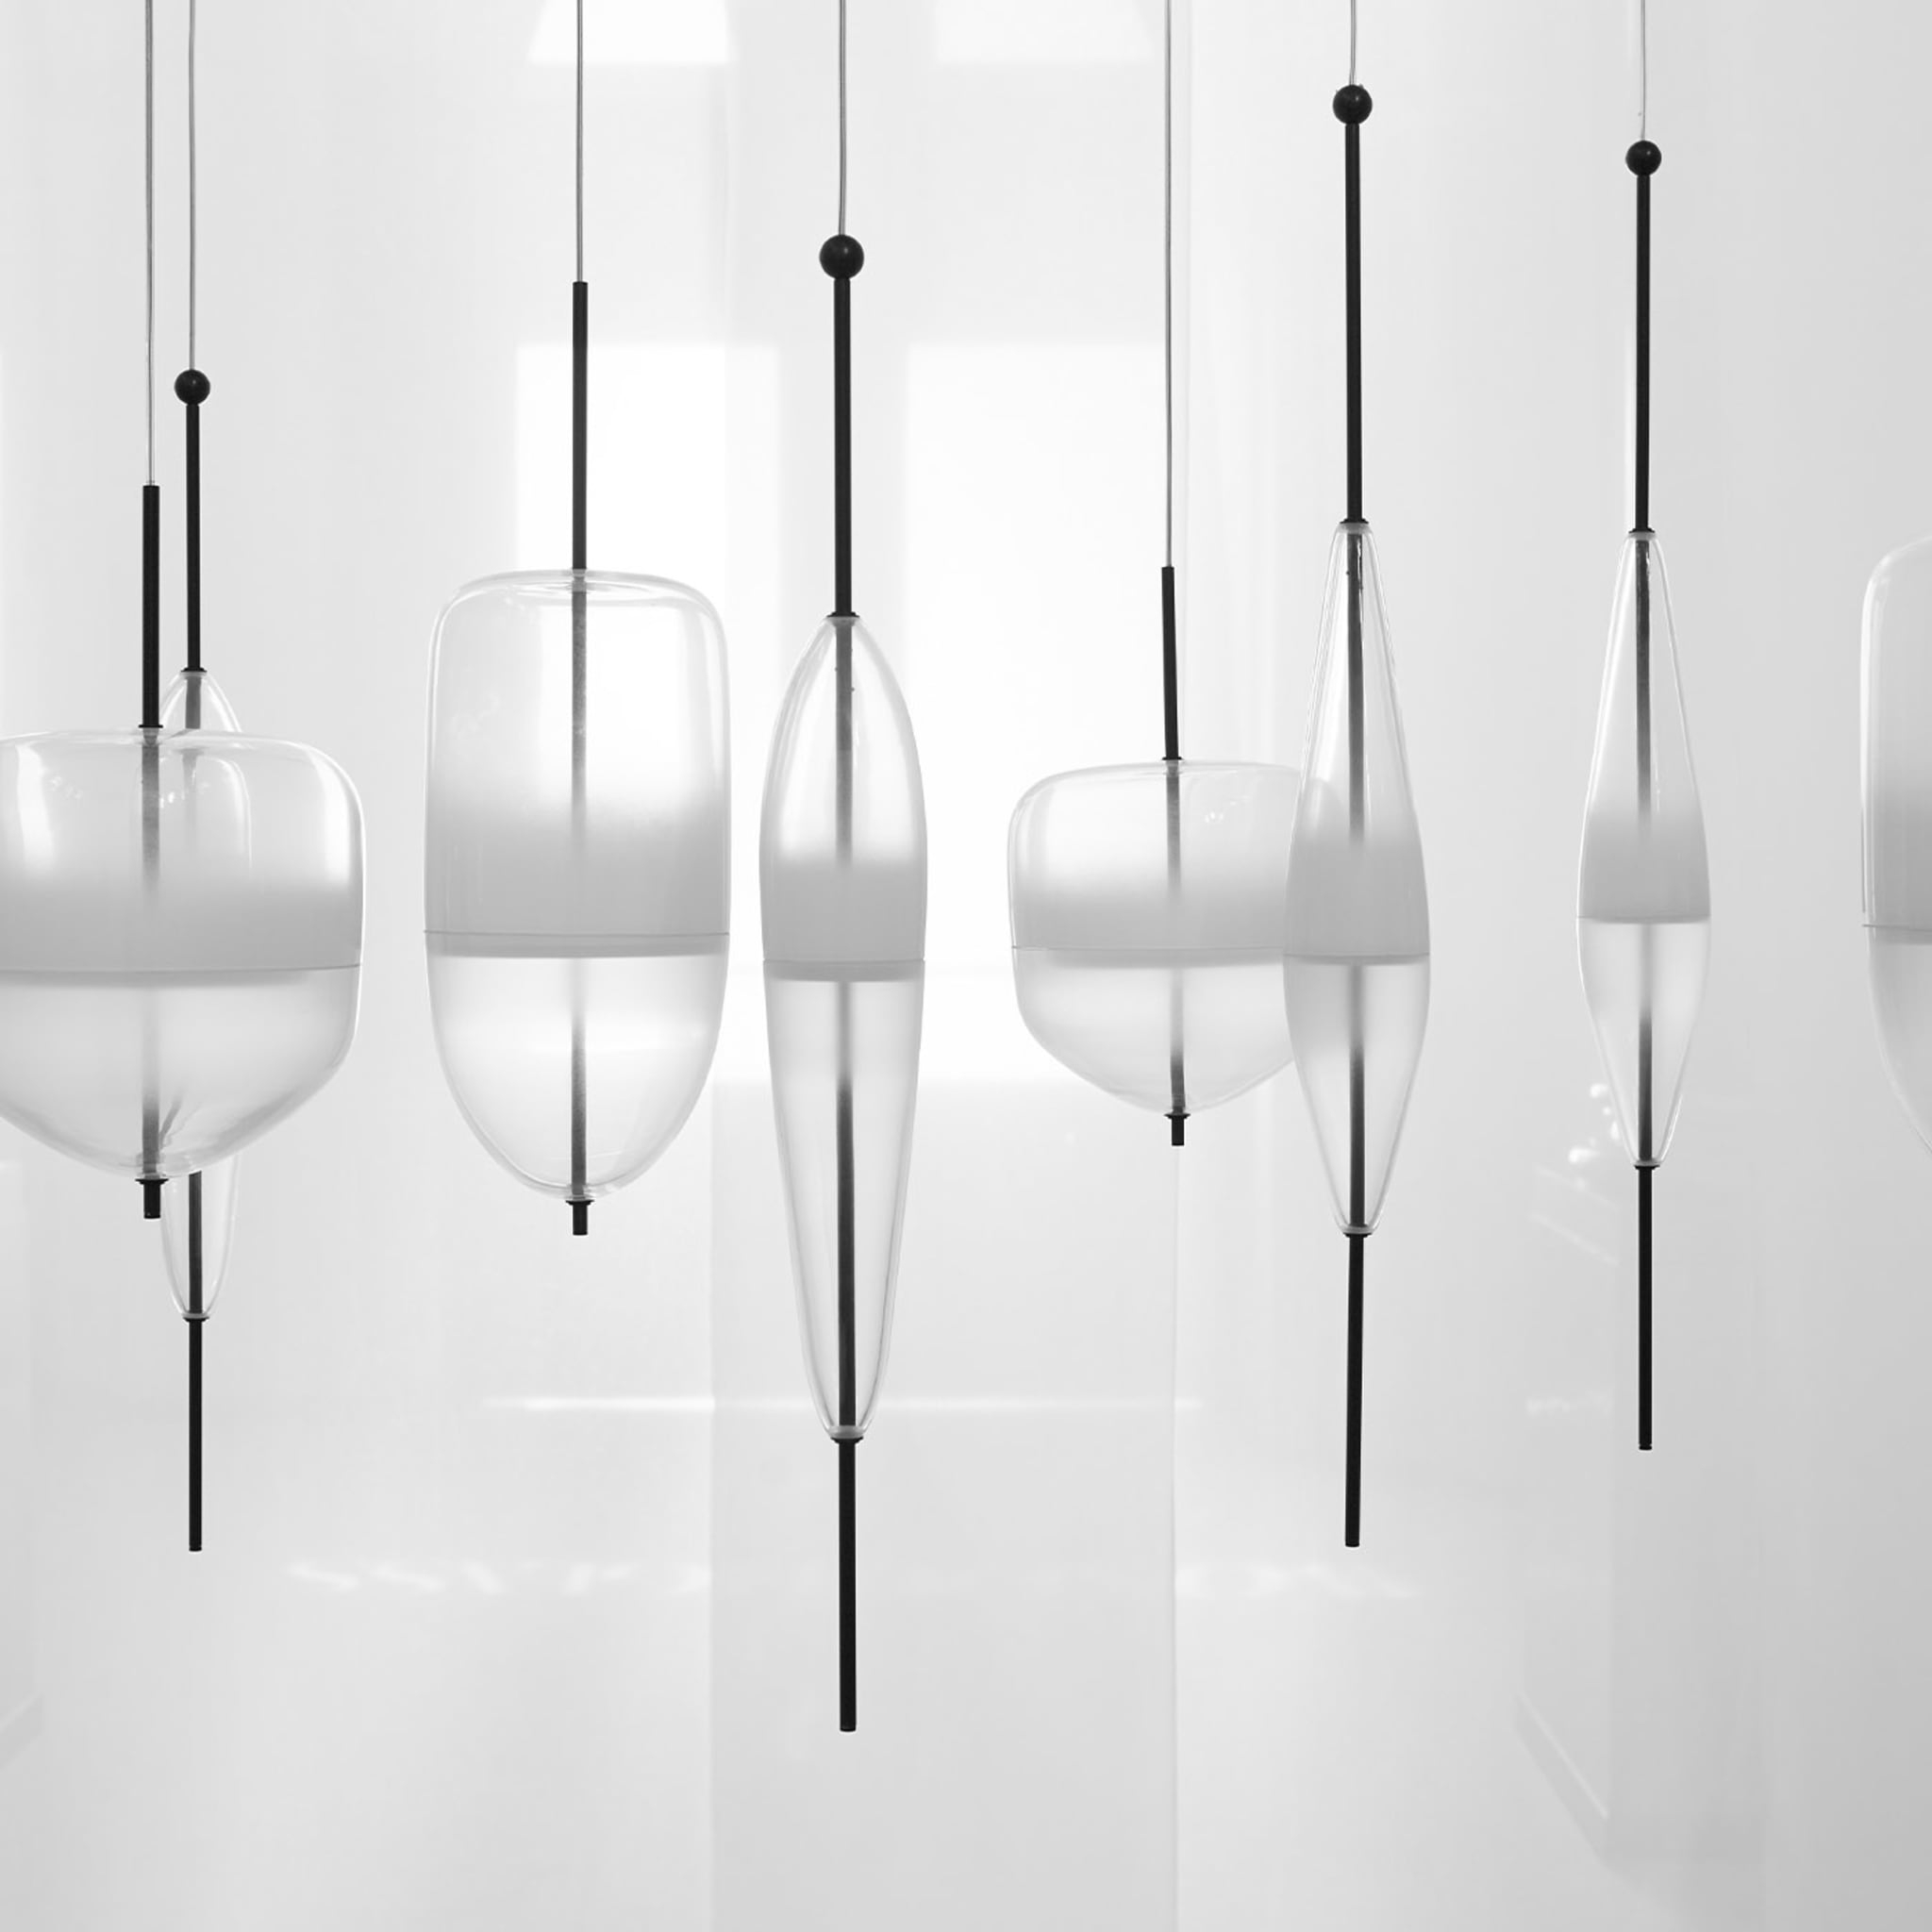 Flow[T] S2 Off White Pendant Lamp by Nao Tamura - Alternative view 1